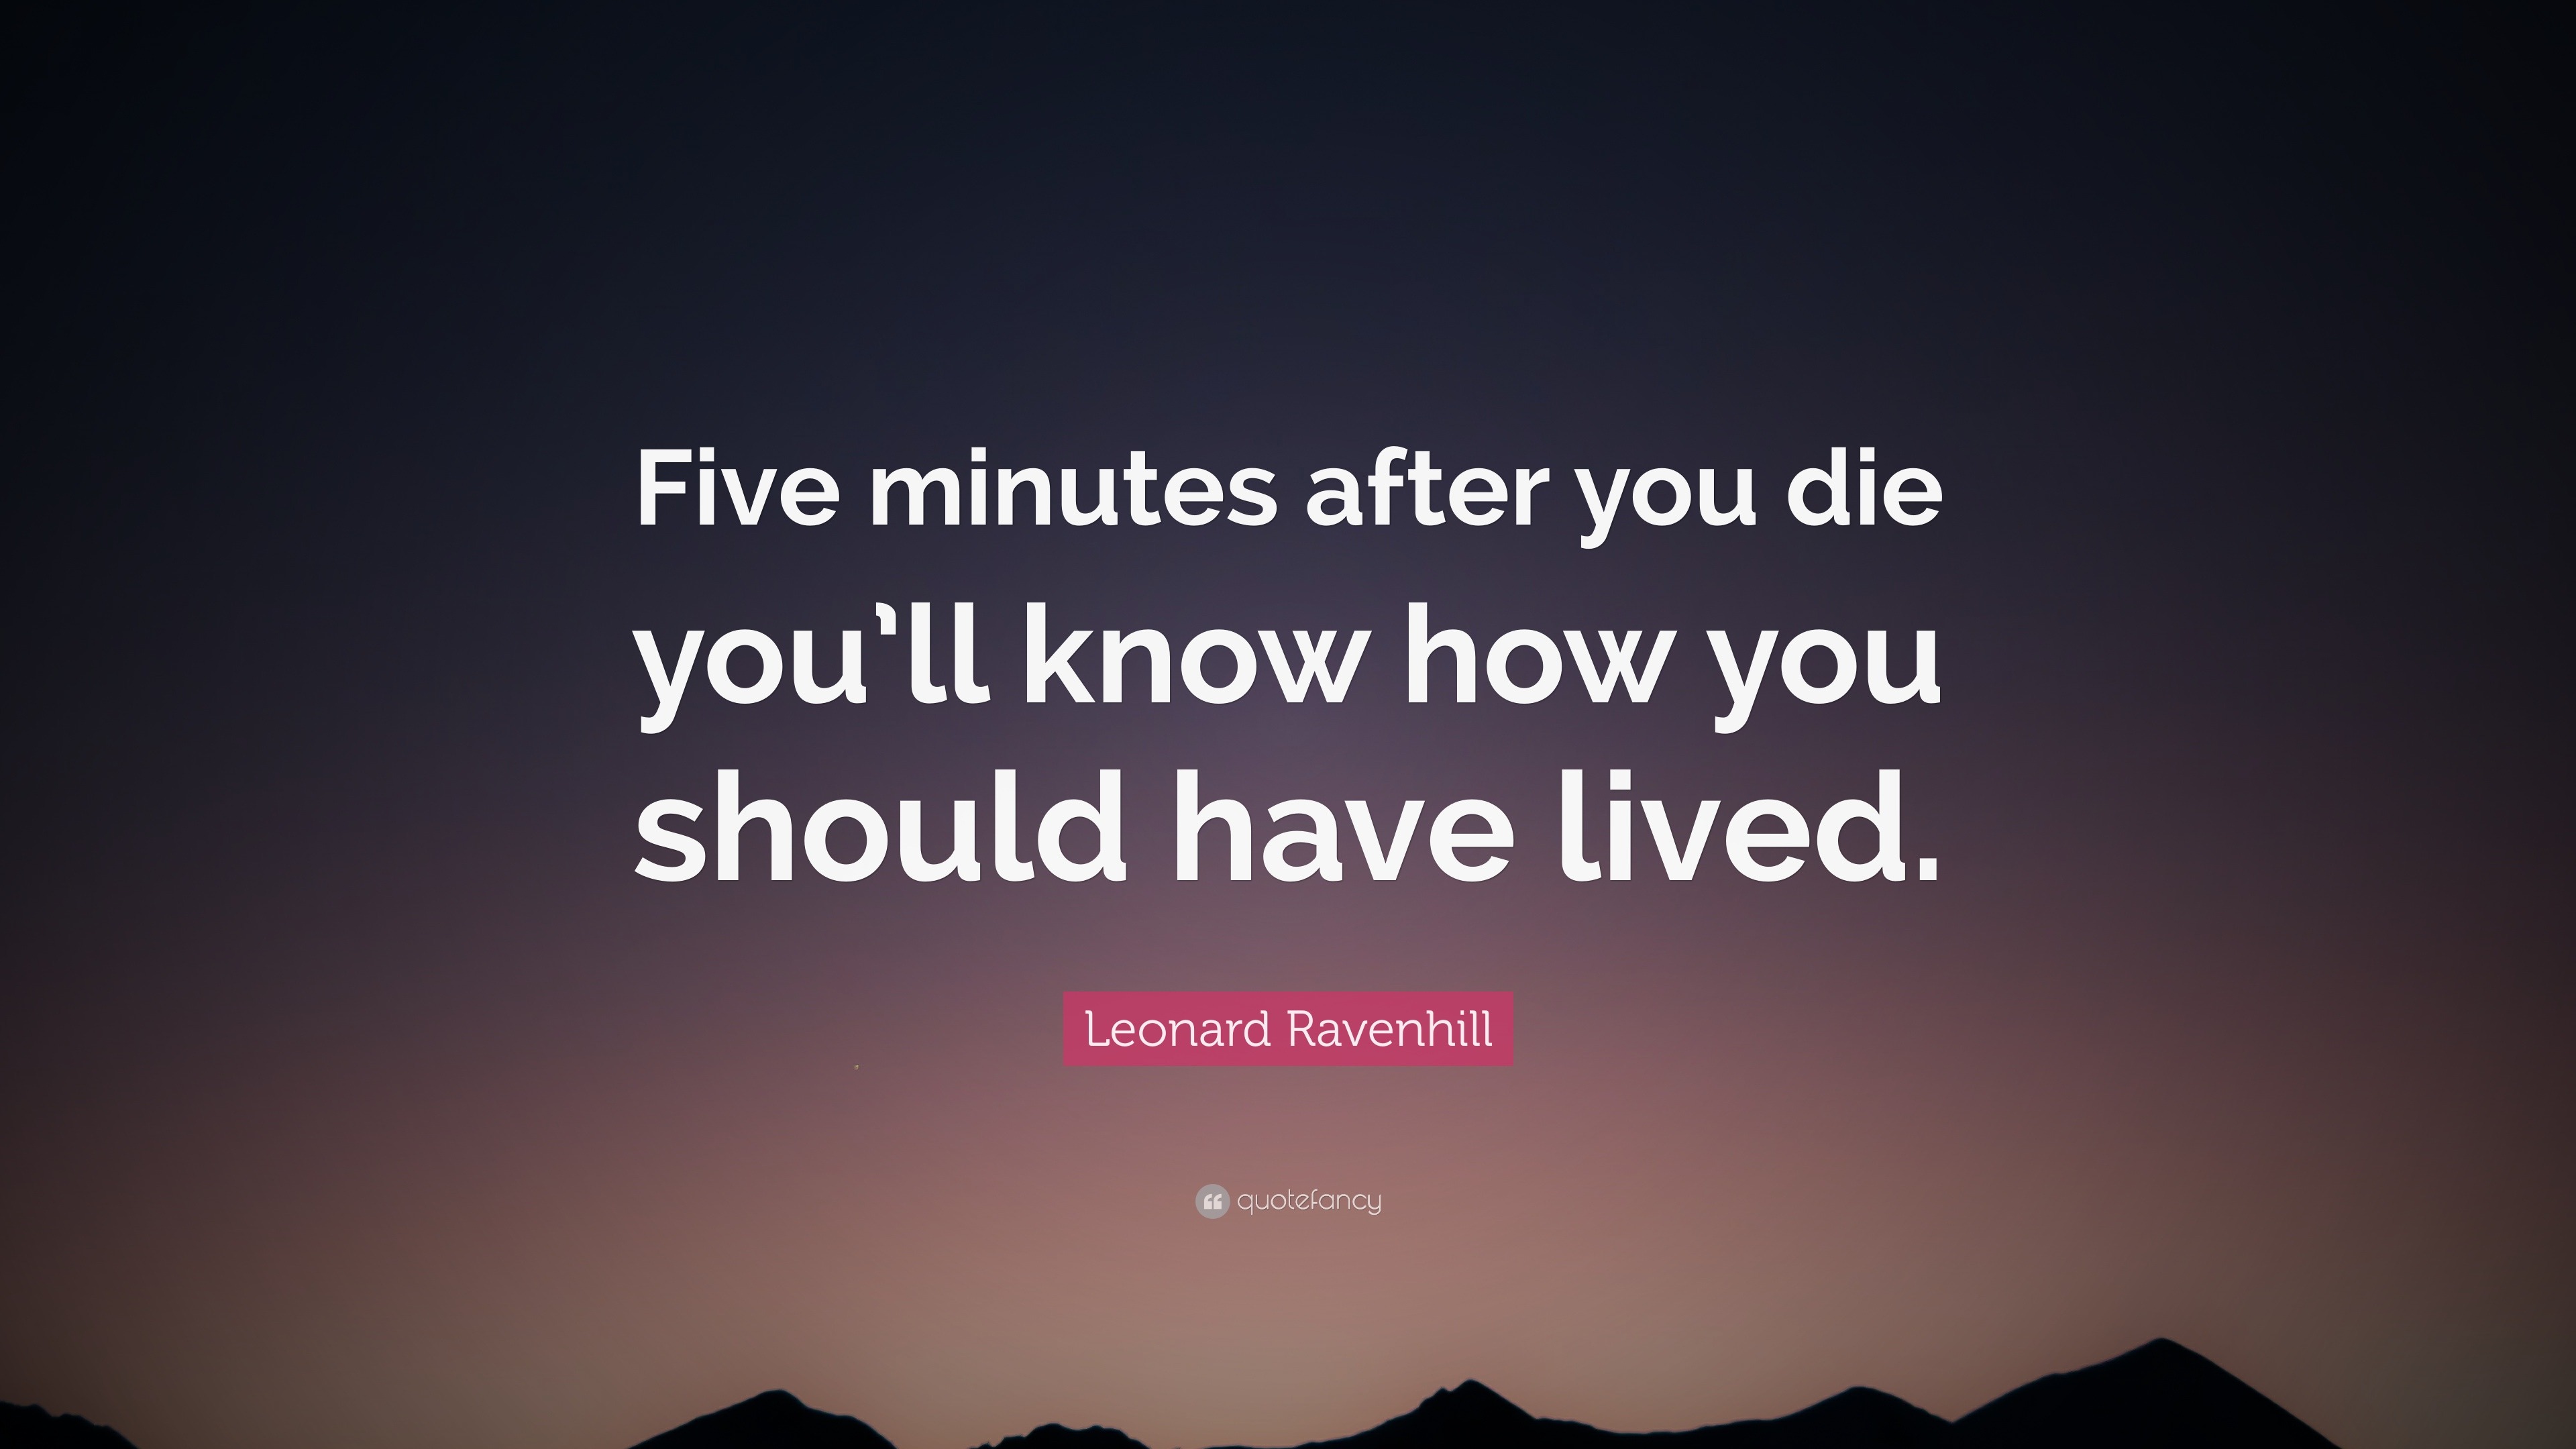 Leonard Ravenhill Quote: “Five minutes after you die you’ll know how ...